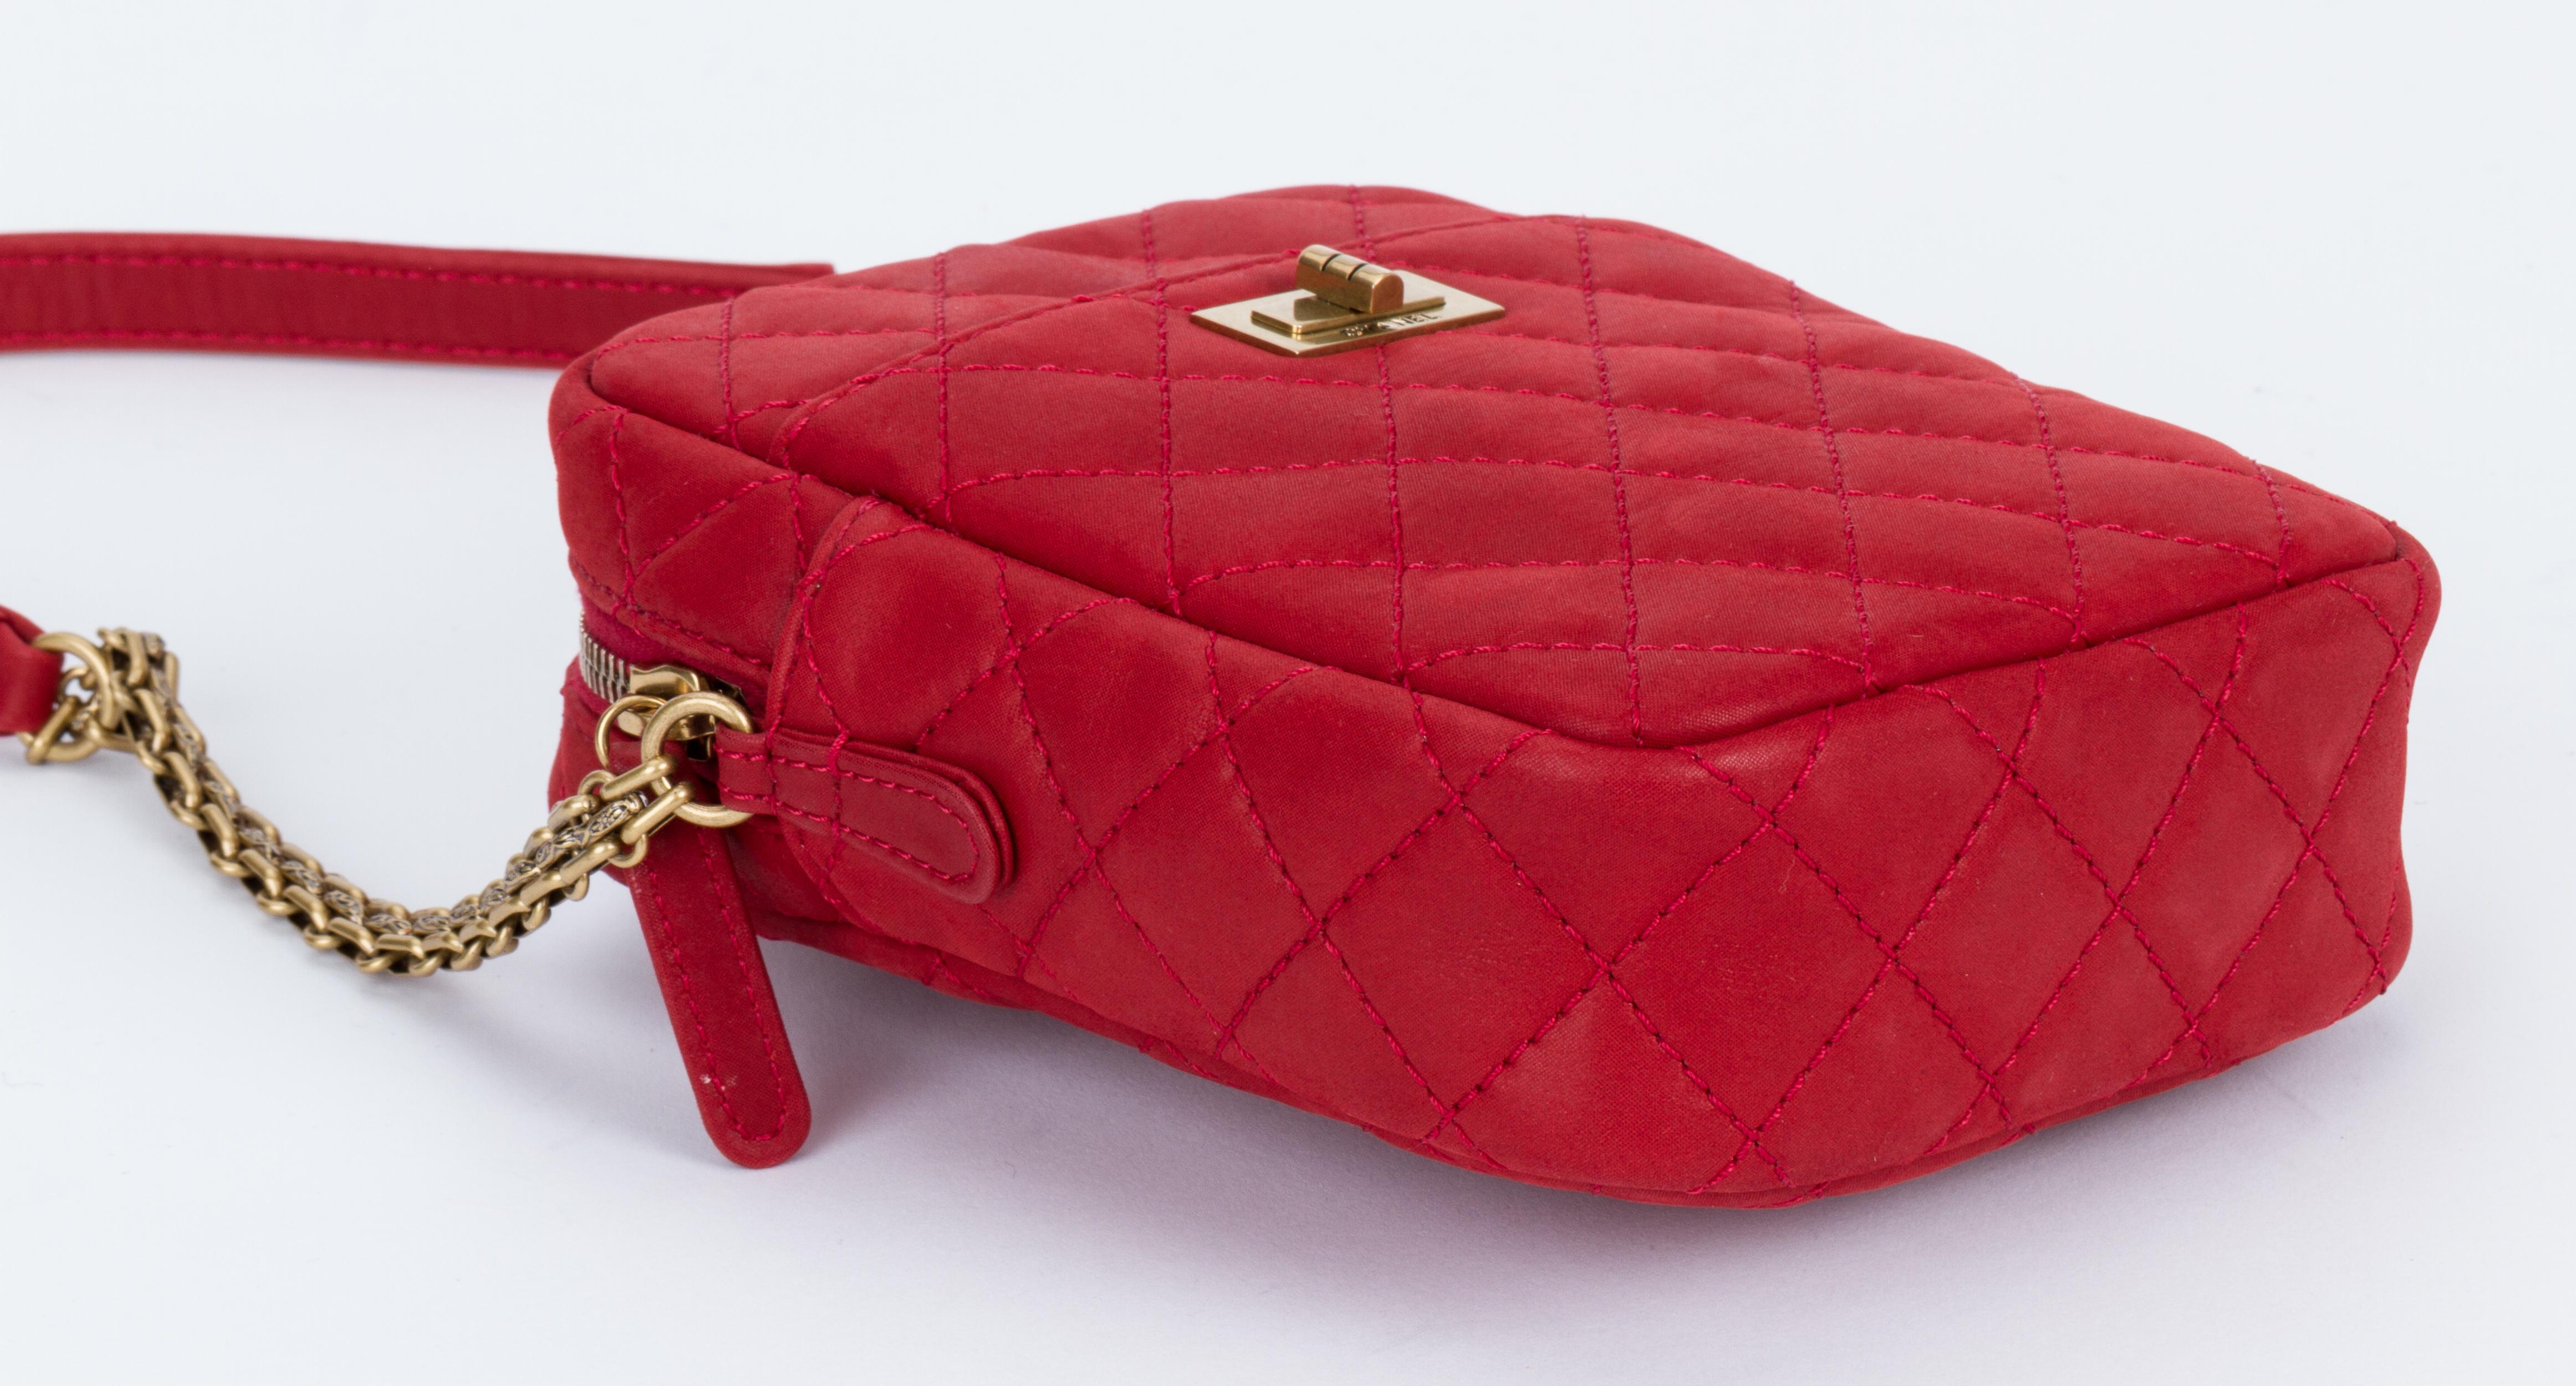 Women's New Chanel Red Quilted Leather Reissue Crossbody Bag